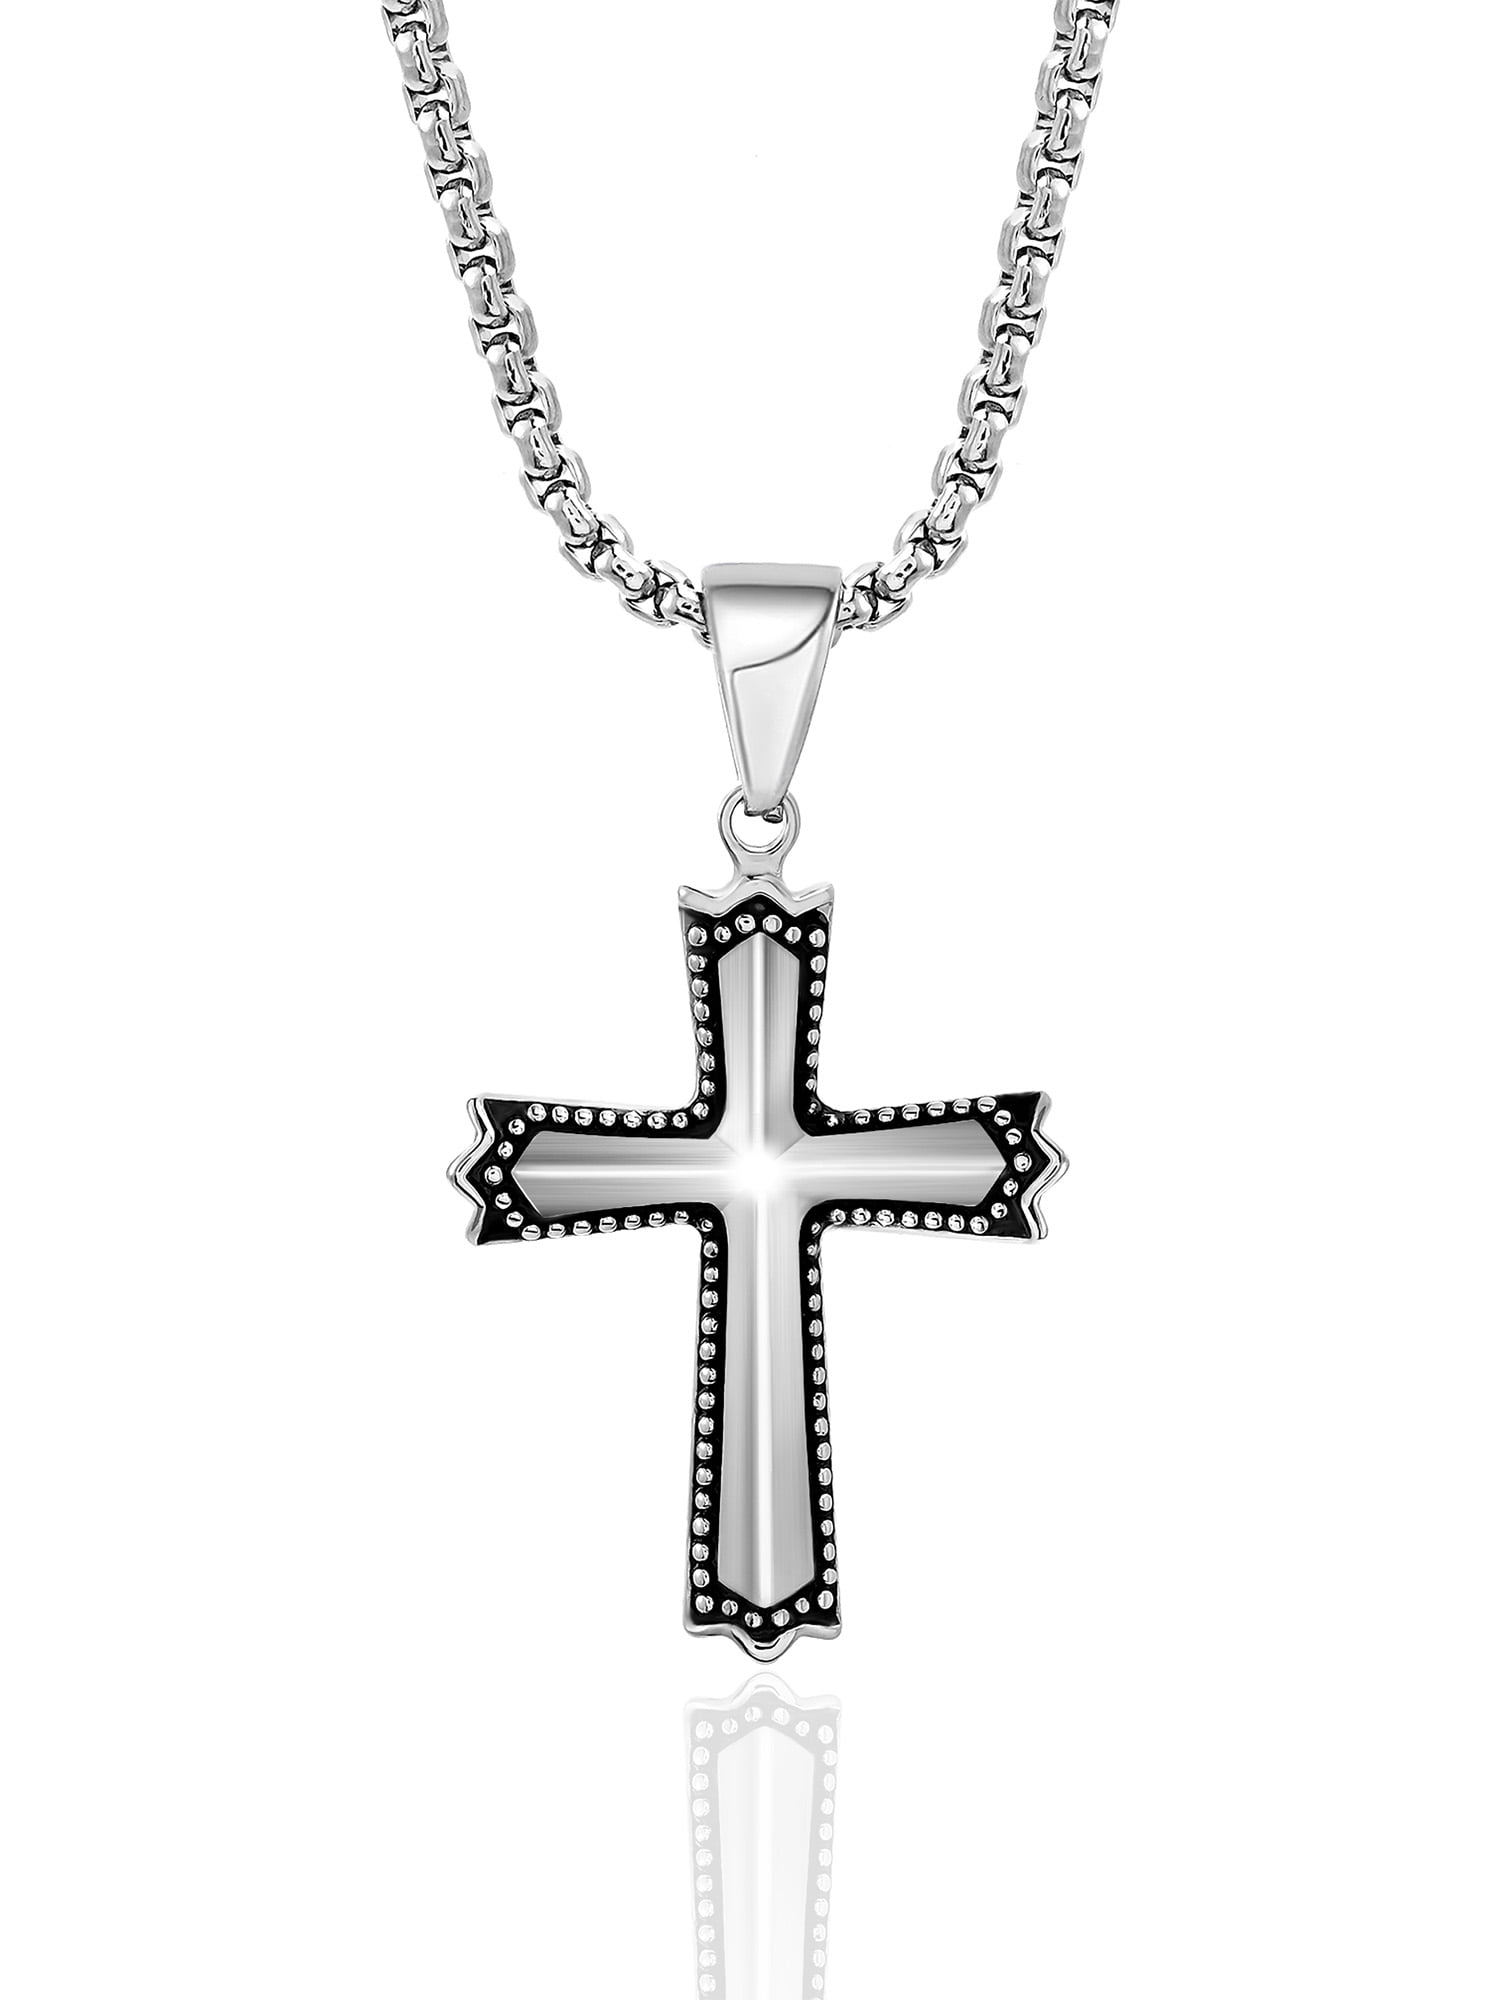 Triple Chain Layer Necklace Drop Necklace Cross Beaded Charm Necklace B76